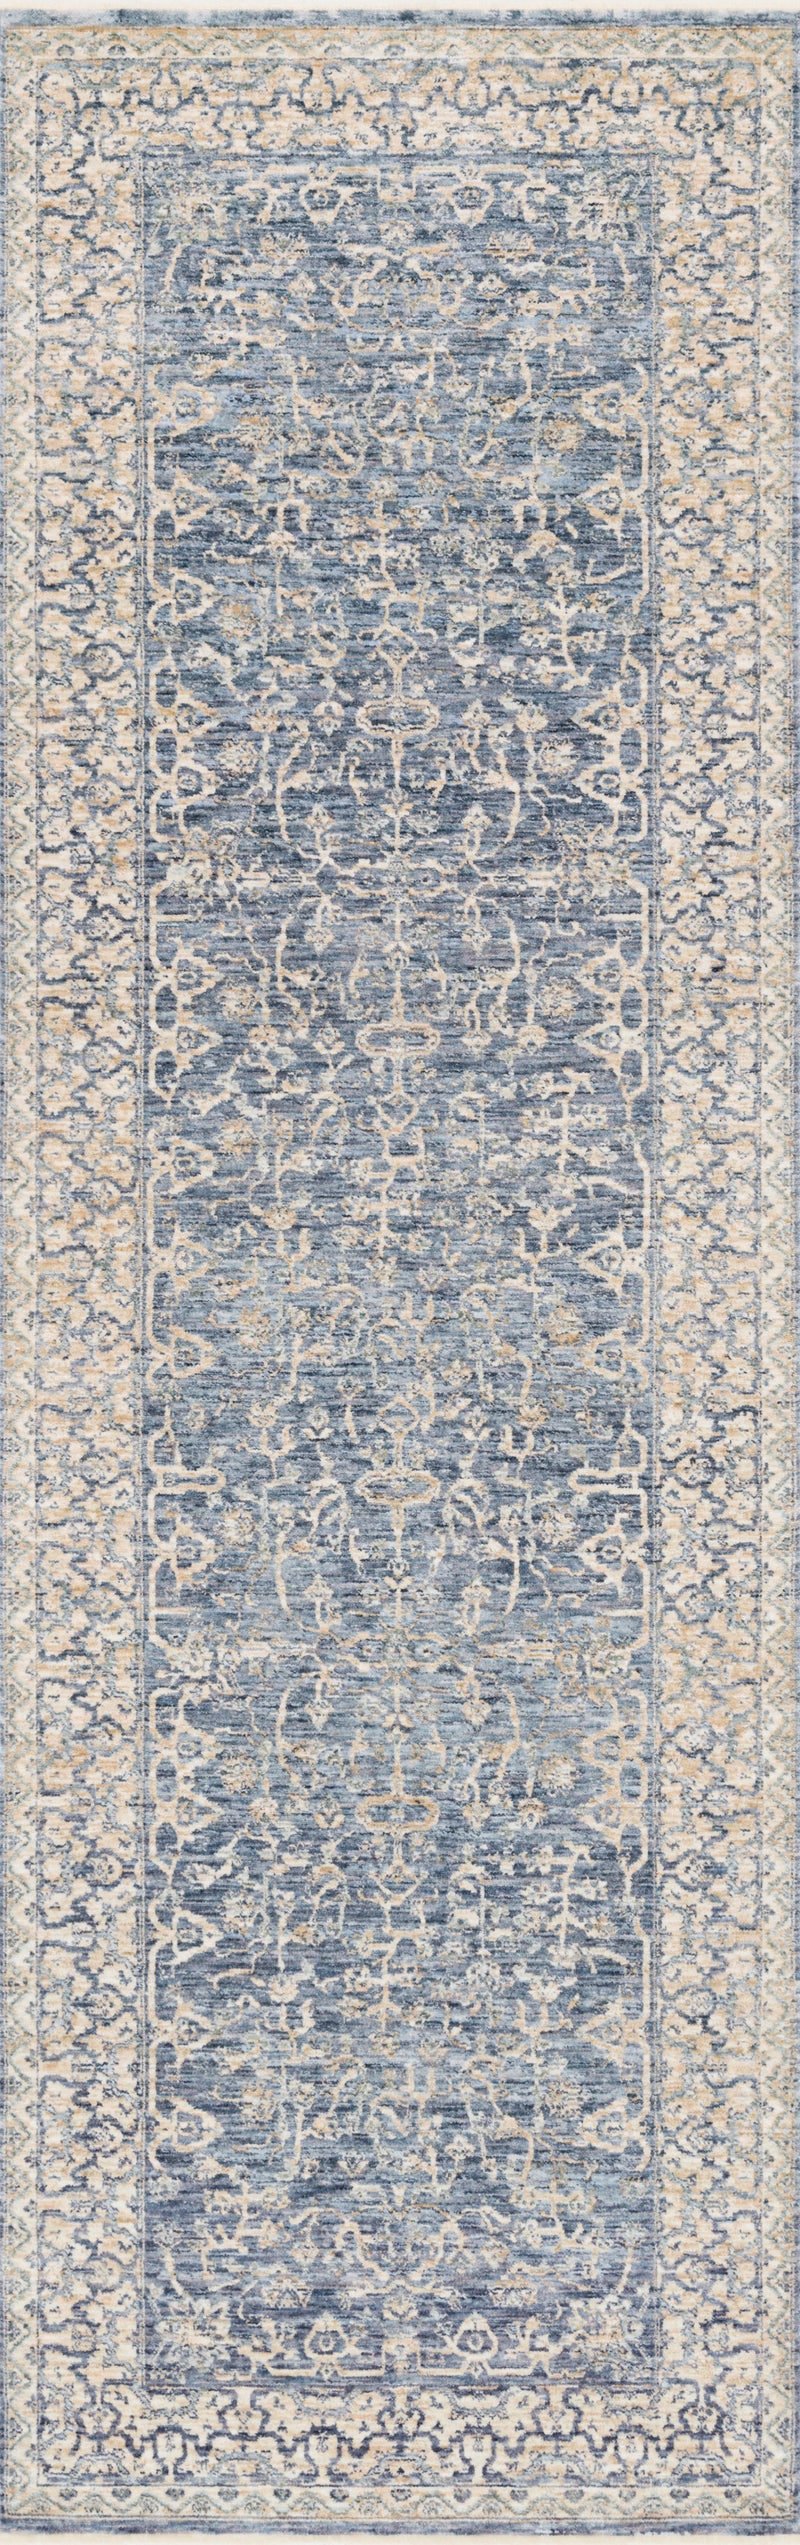 PANDORA Collection Rug  in  DARK BLUE / IVORY Blue Accent Power-Loomed Polyester